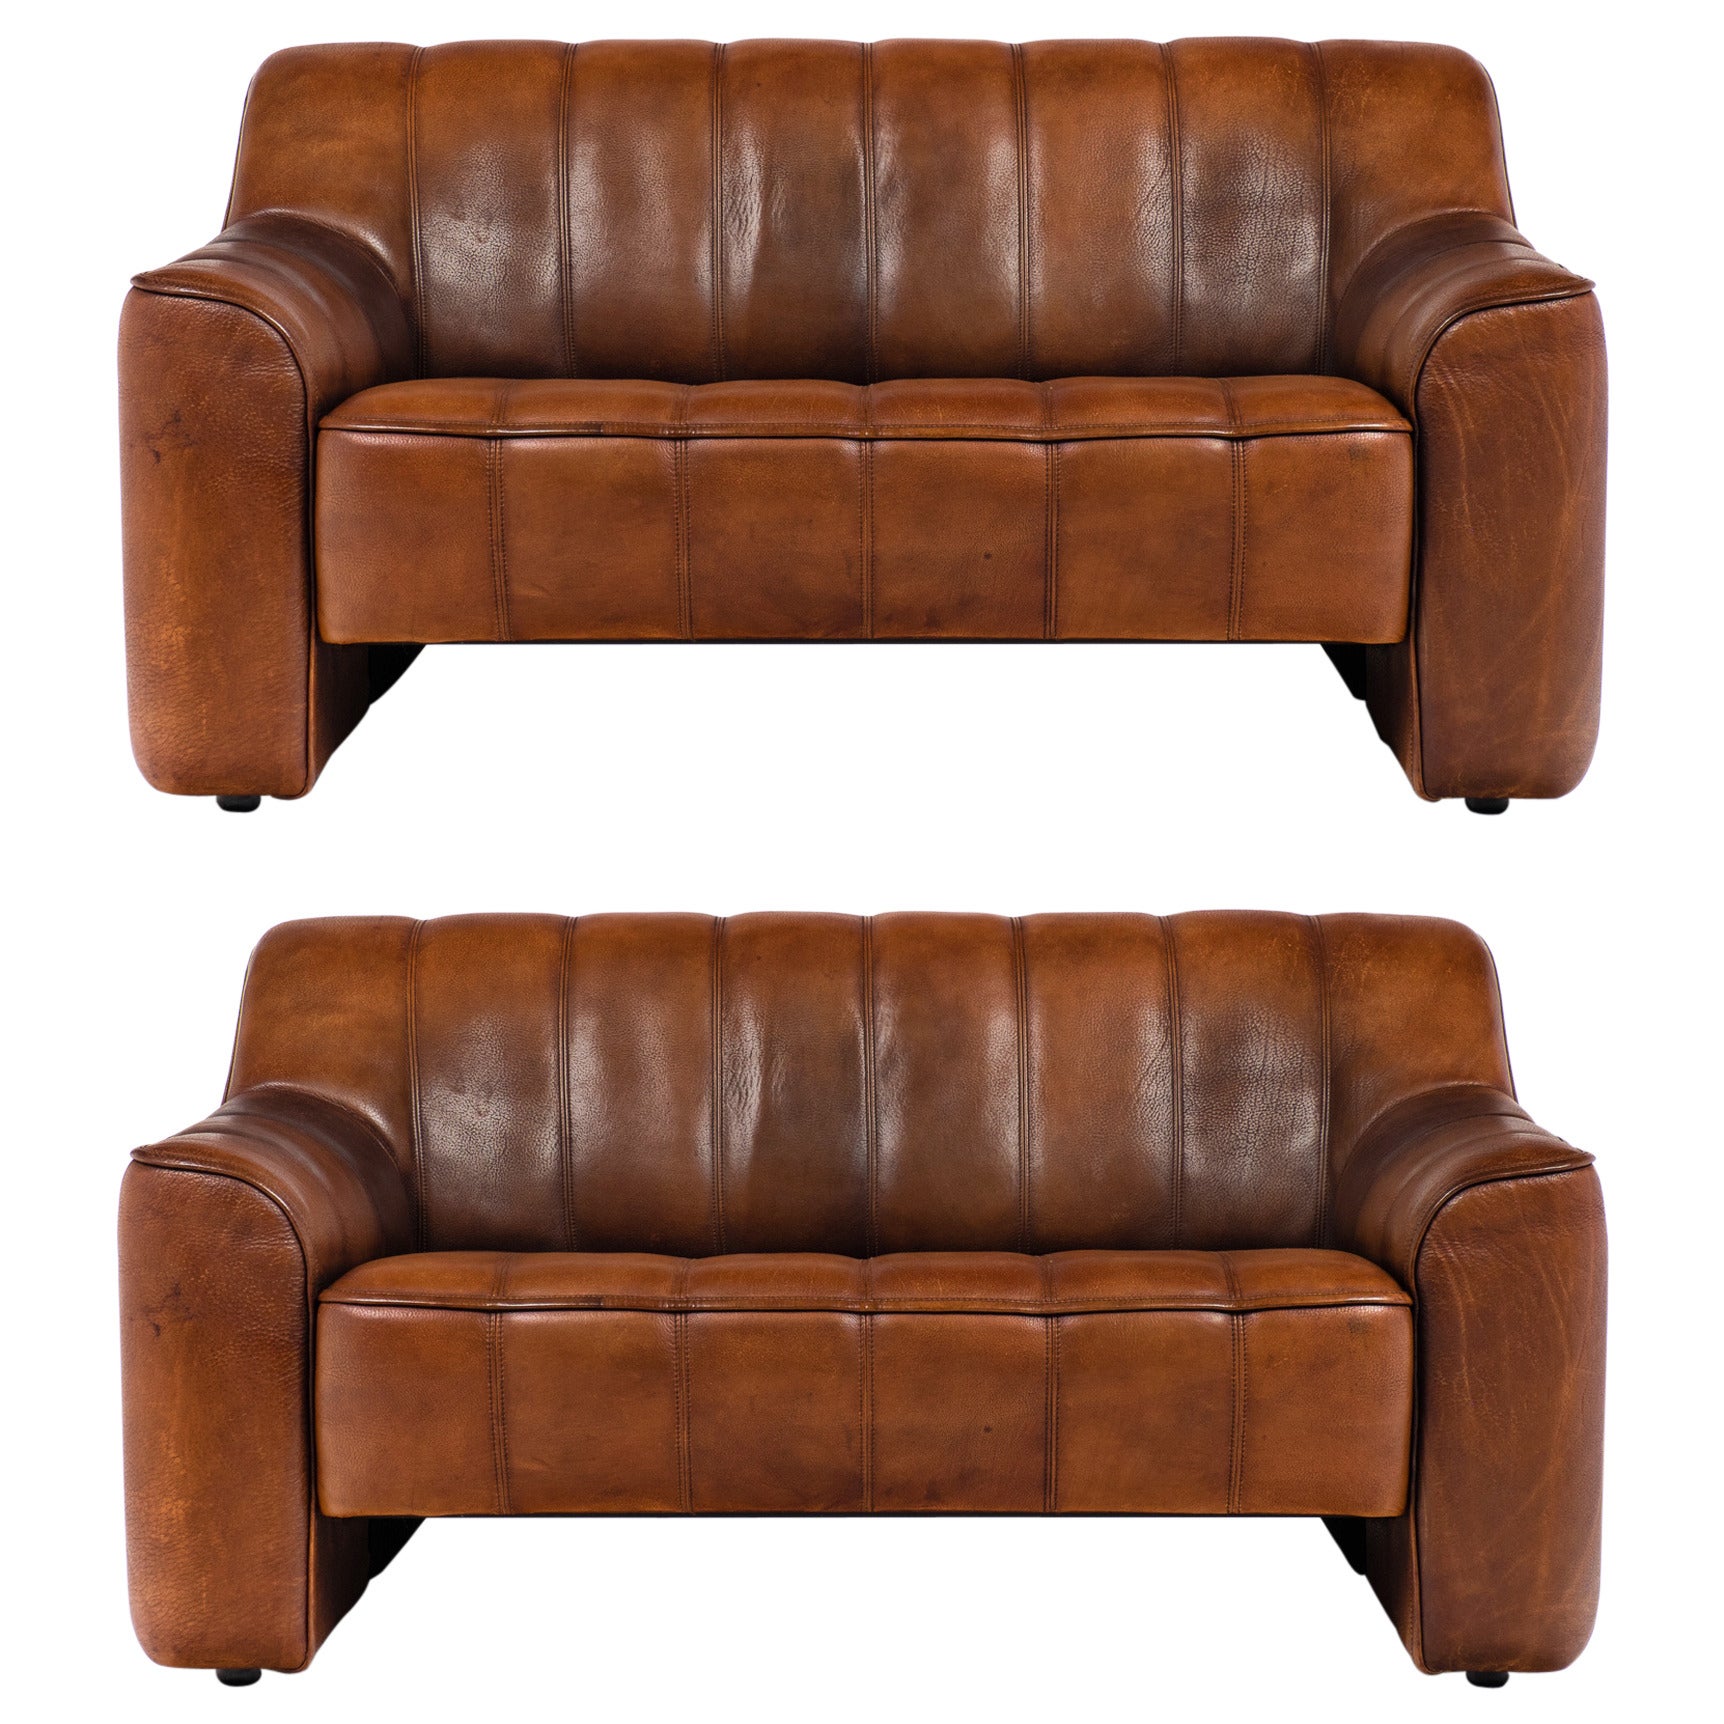 De Sede Pair of Leather Sofas DS 44 from Switzerland